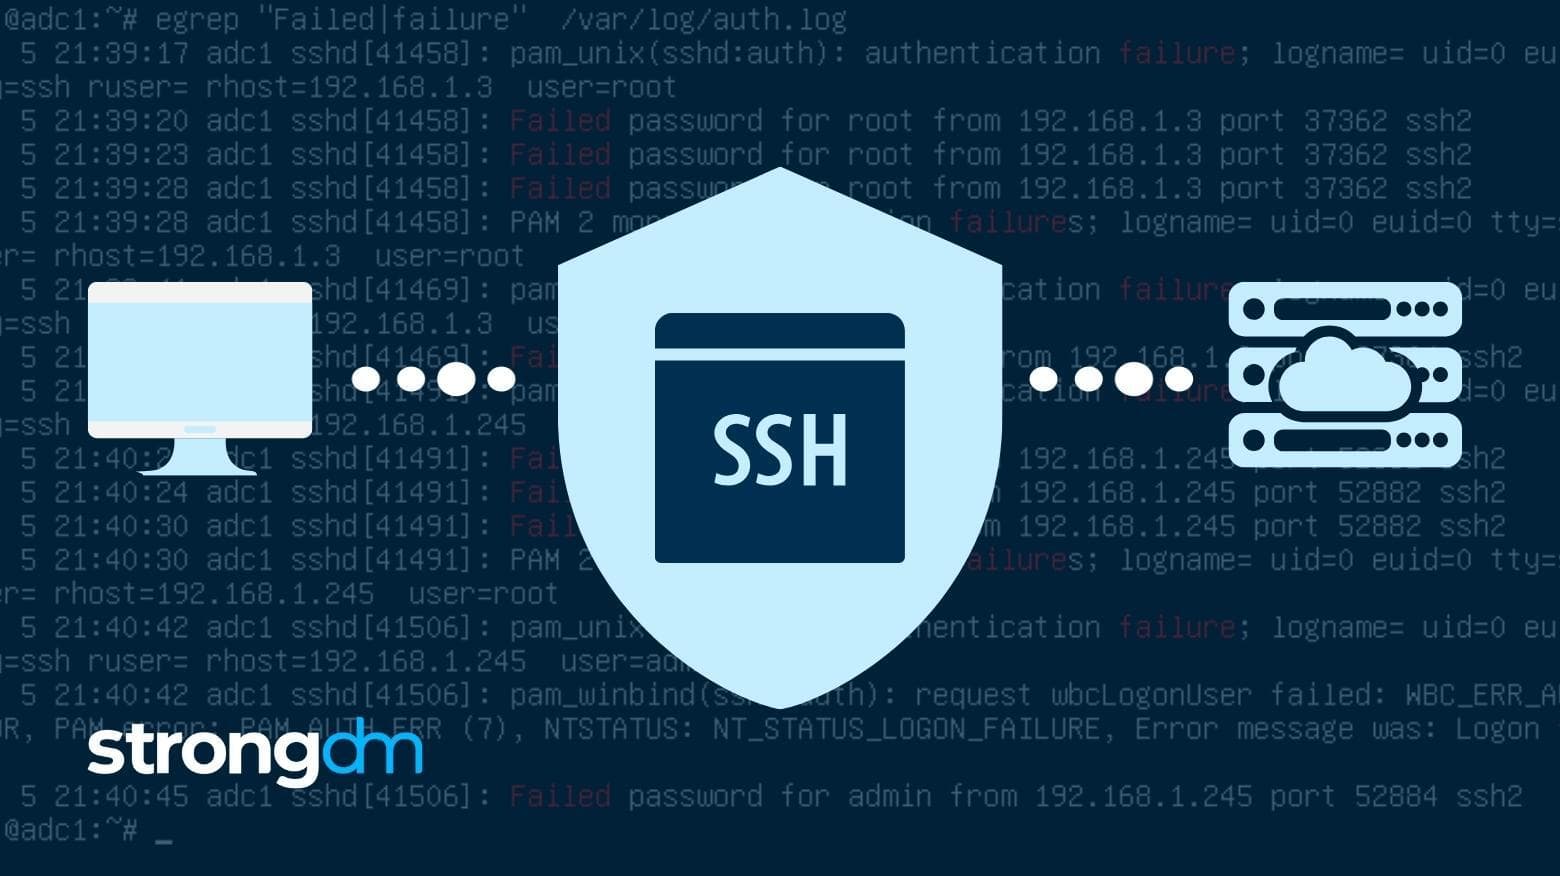 How to View SSH Logs?